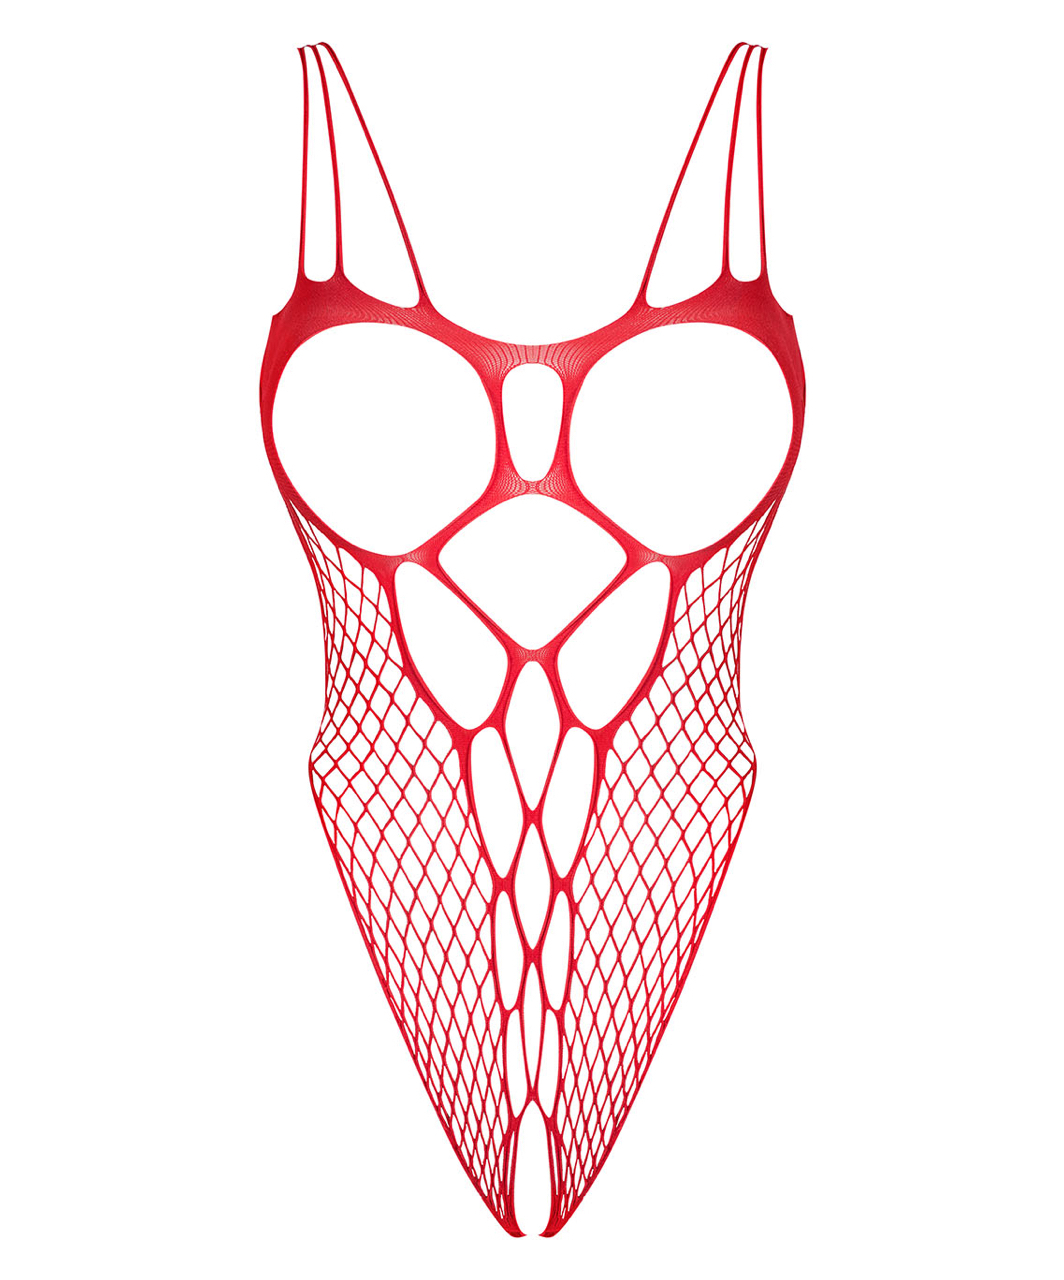 Obsessive red net crotchless bodysuit